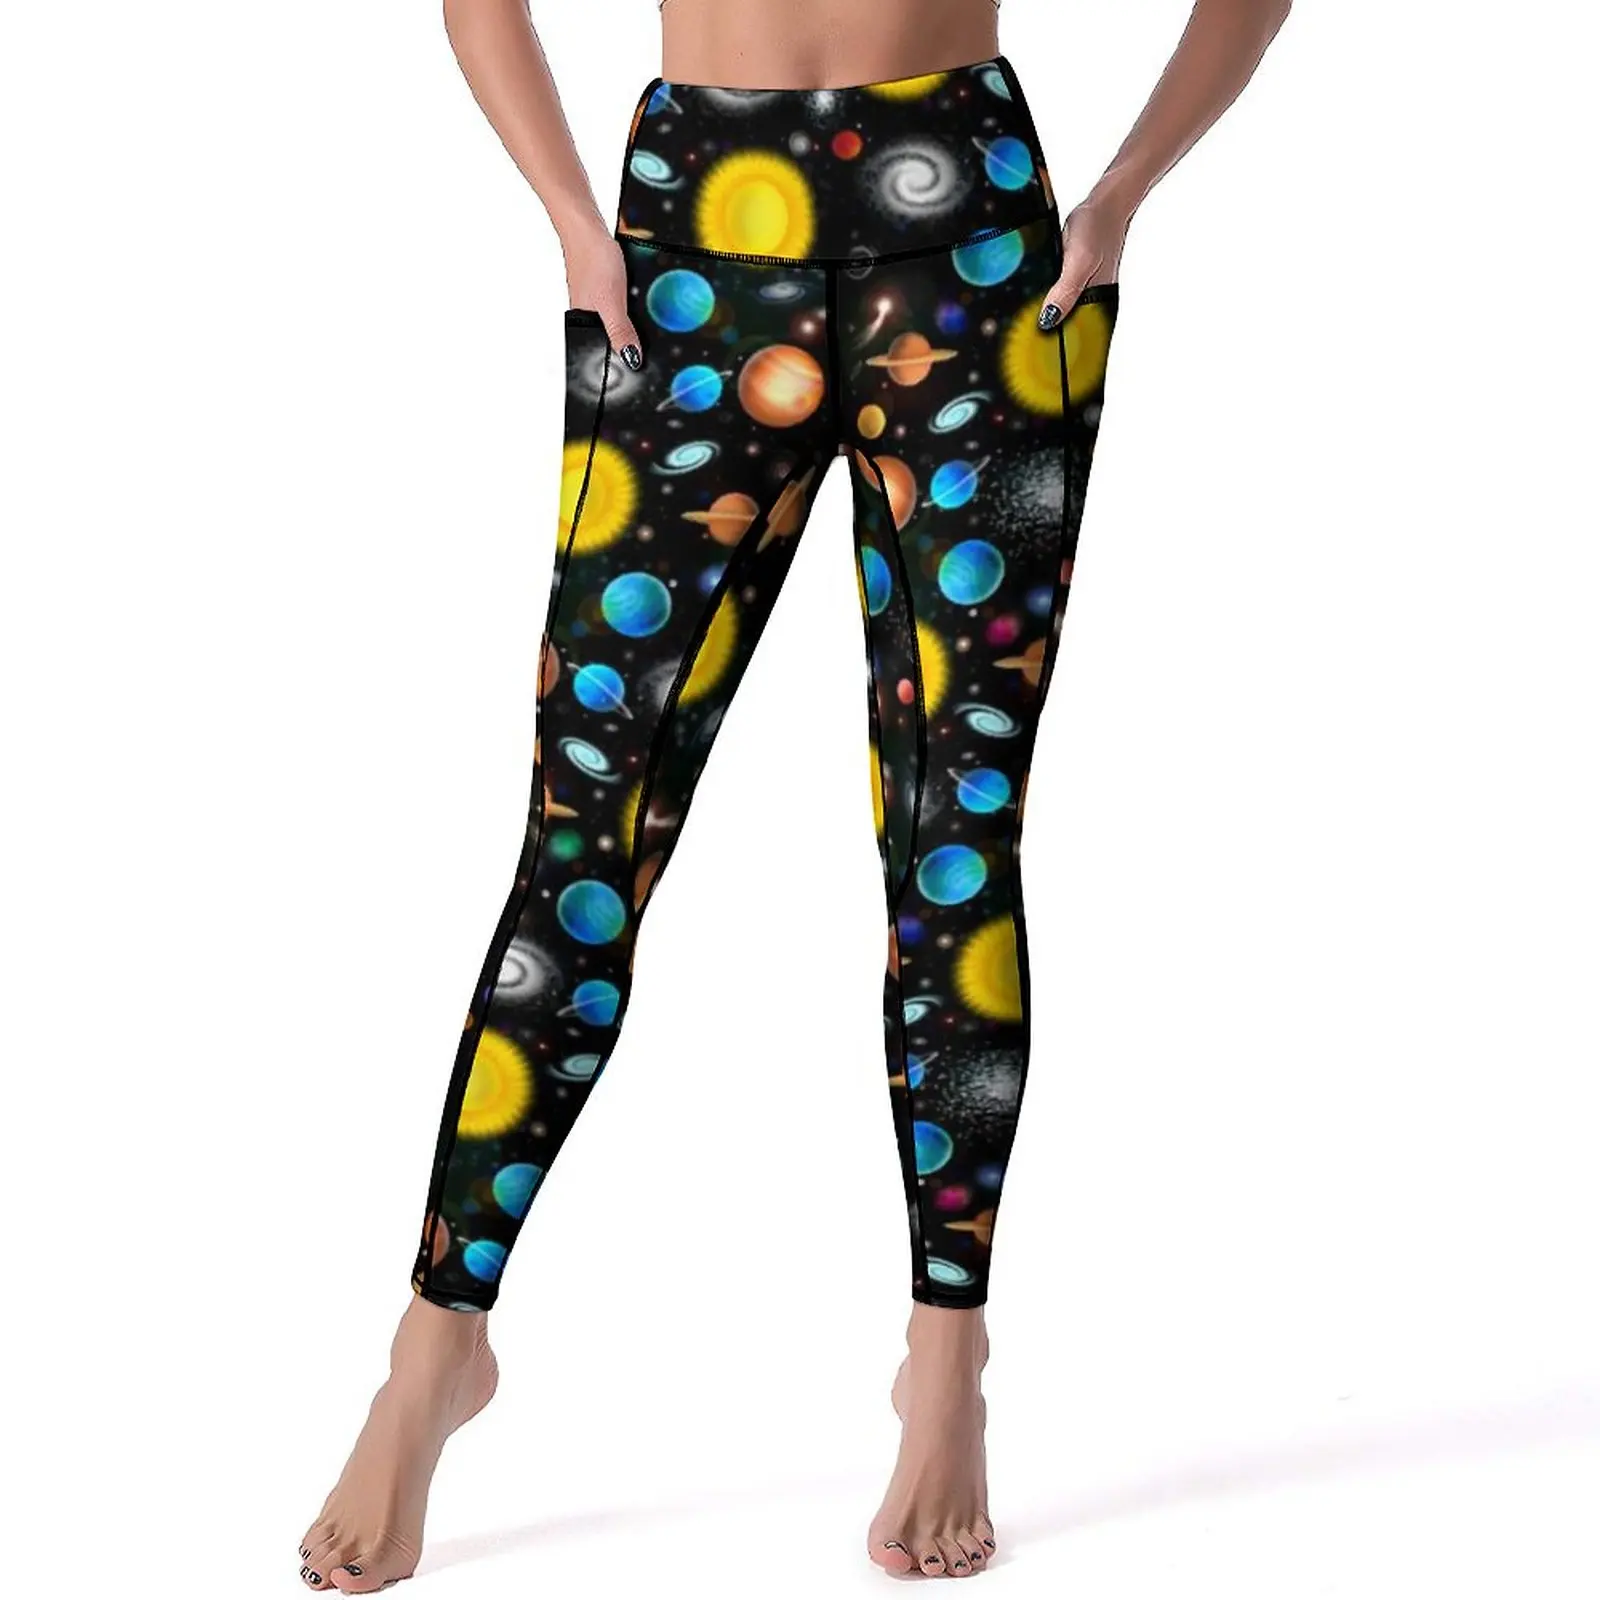 

Gold Moon Print Leggings Colorful Astronomy Space Fitness Yoga Pants Push Up Quick-Dry Sports Tights Breathable Graphic Leggins